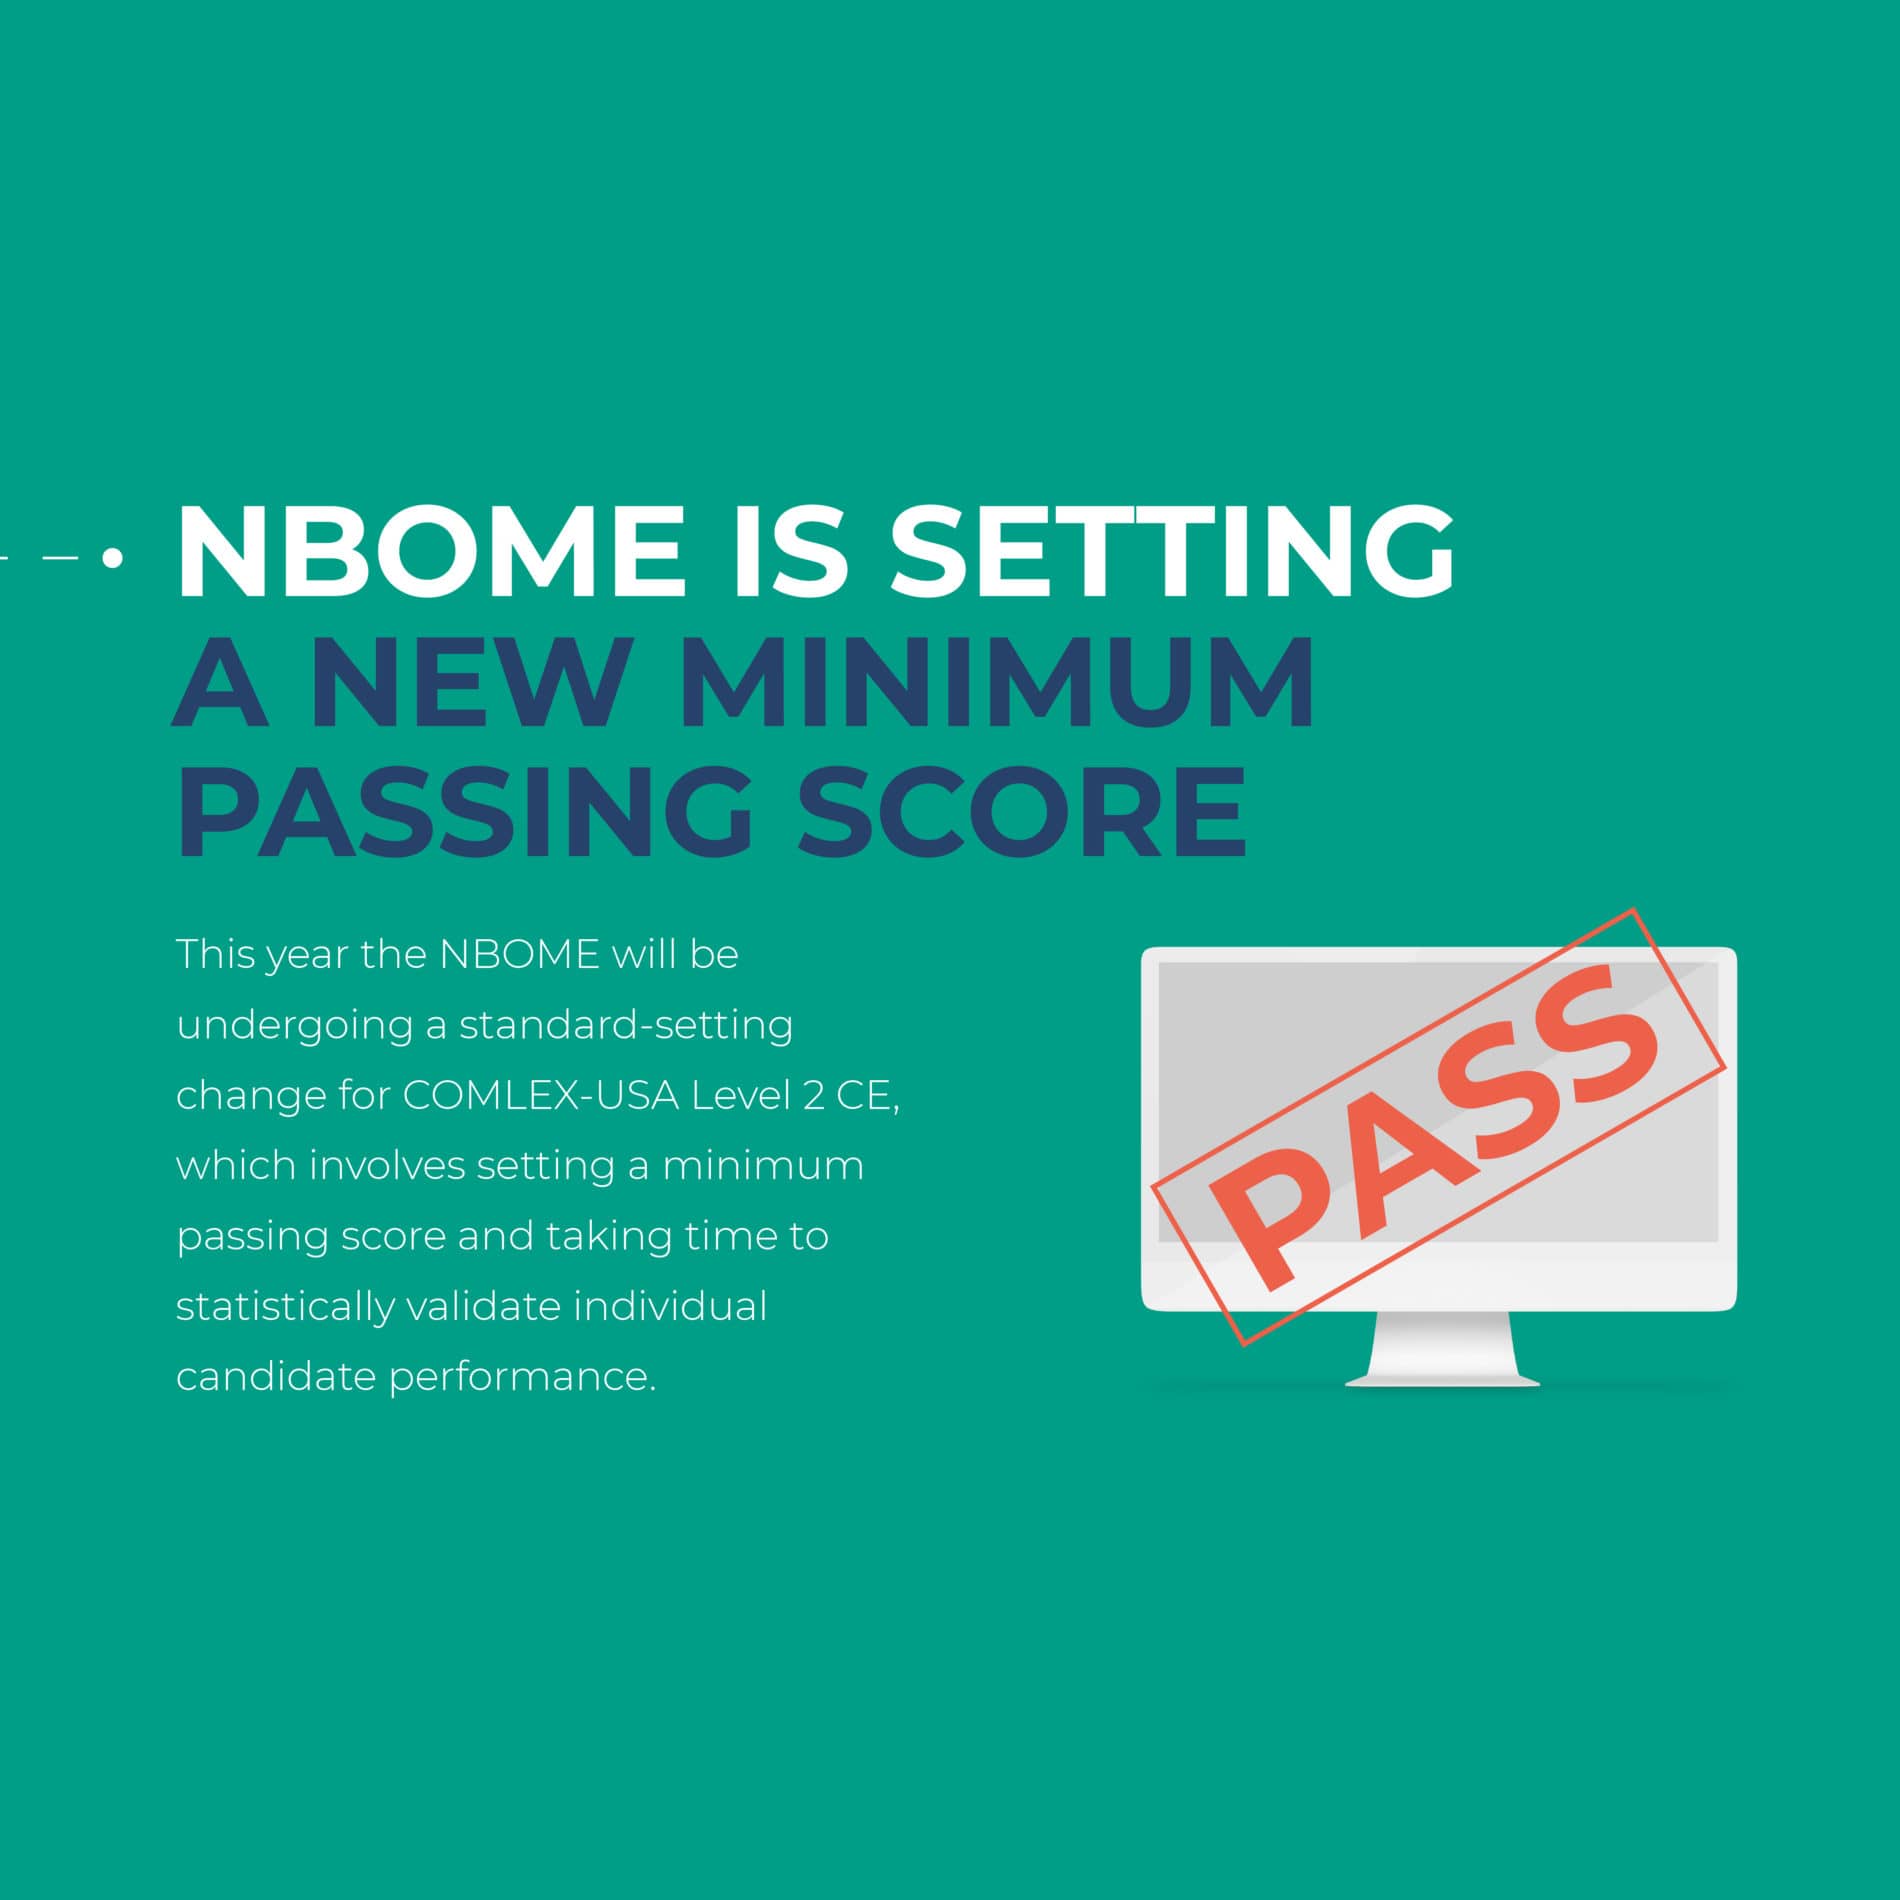 NBOME is setting a new minimum passing score